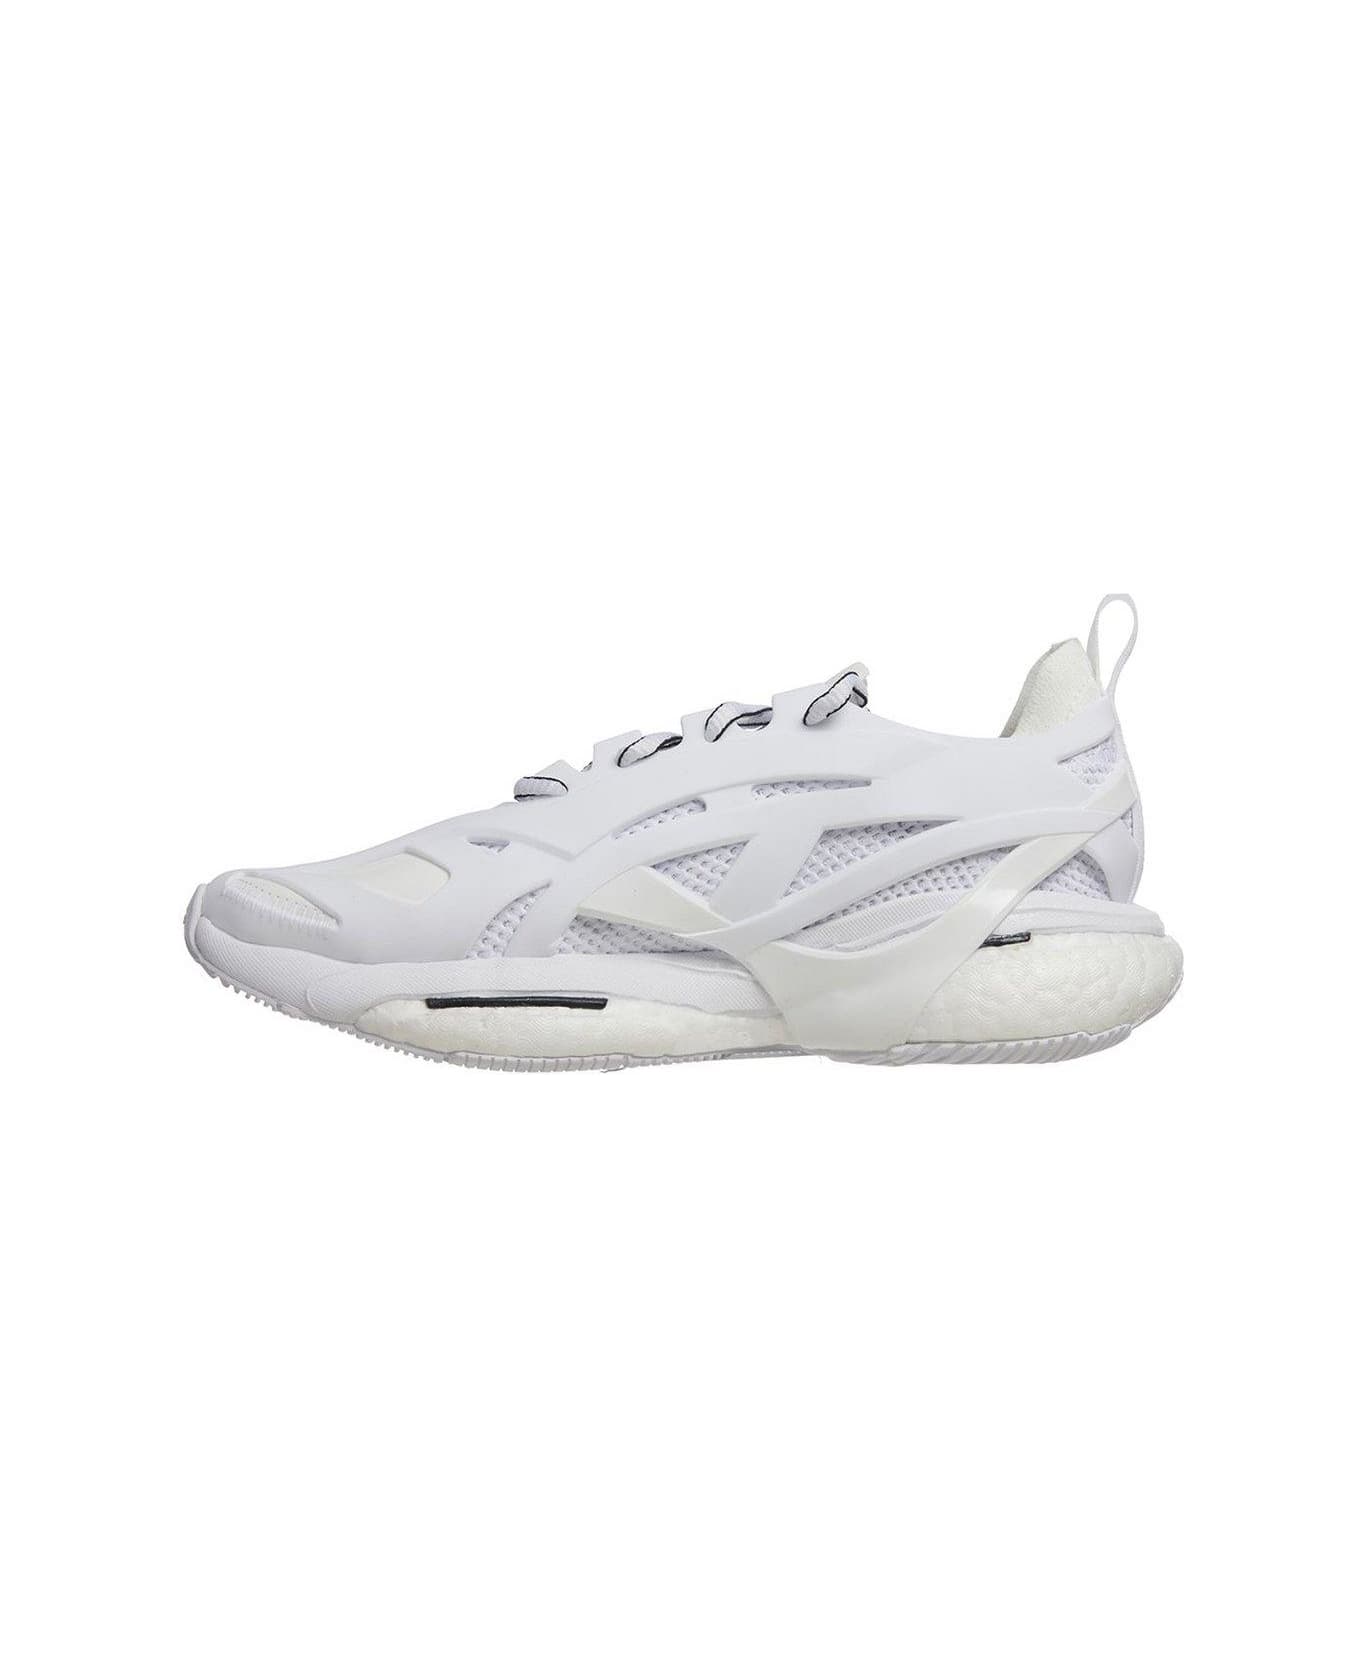 Adidas by Stella McCartney Solarglide Sneakers - WHITE スニーカー